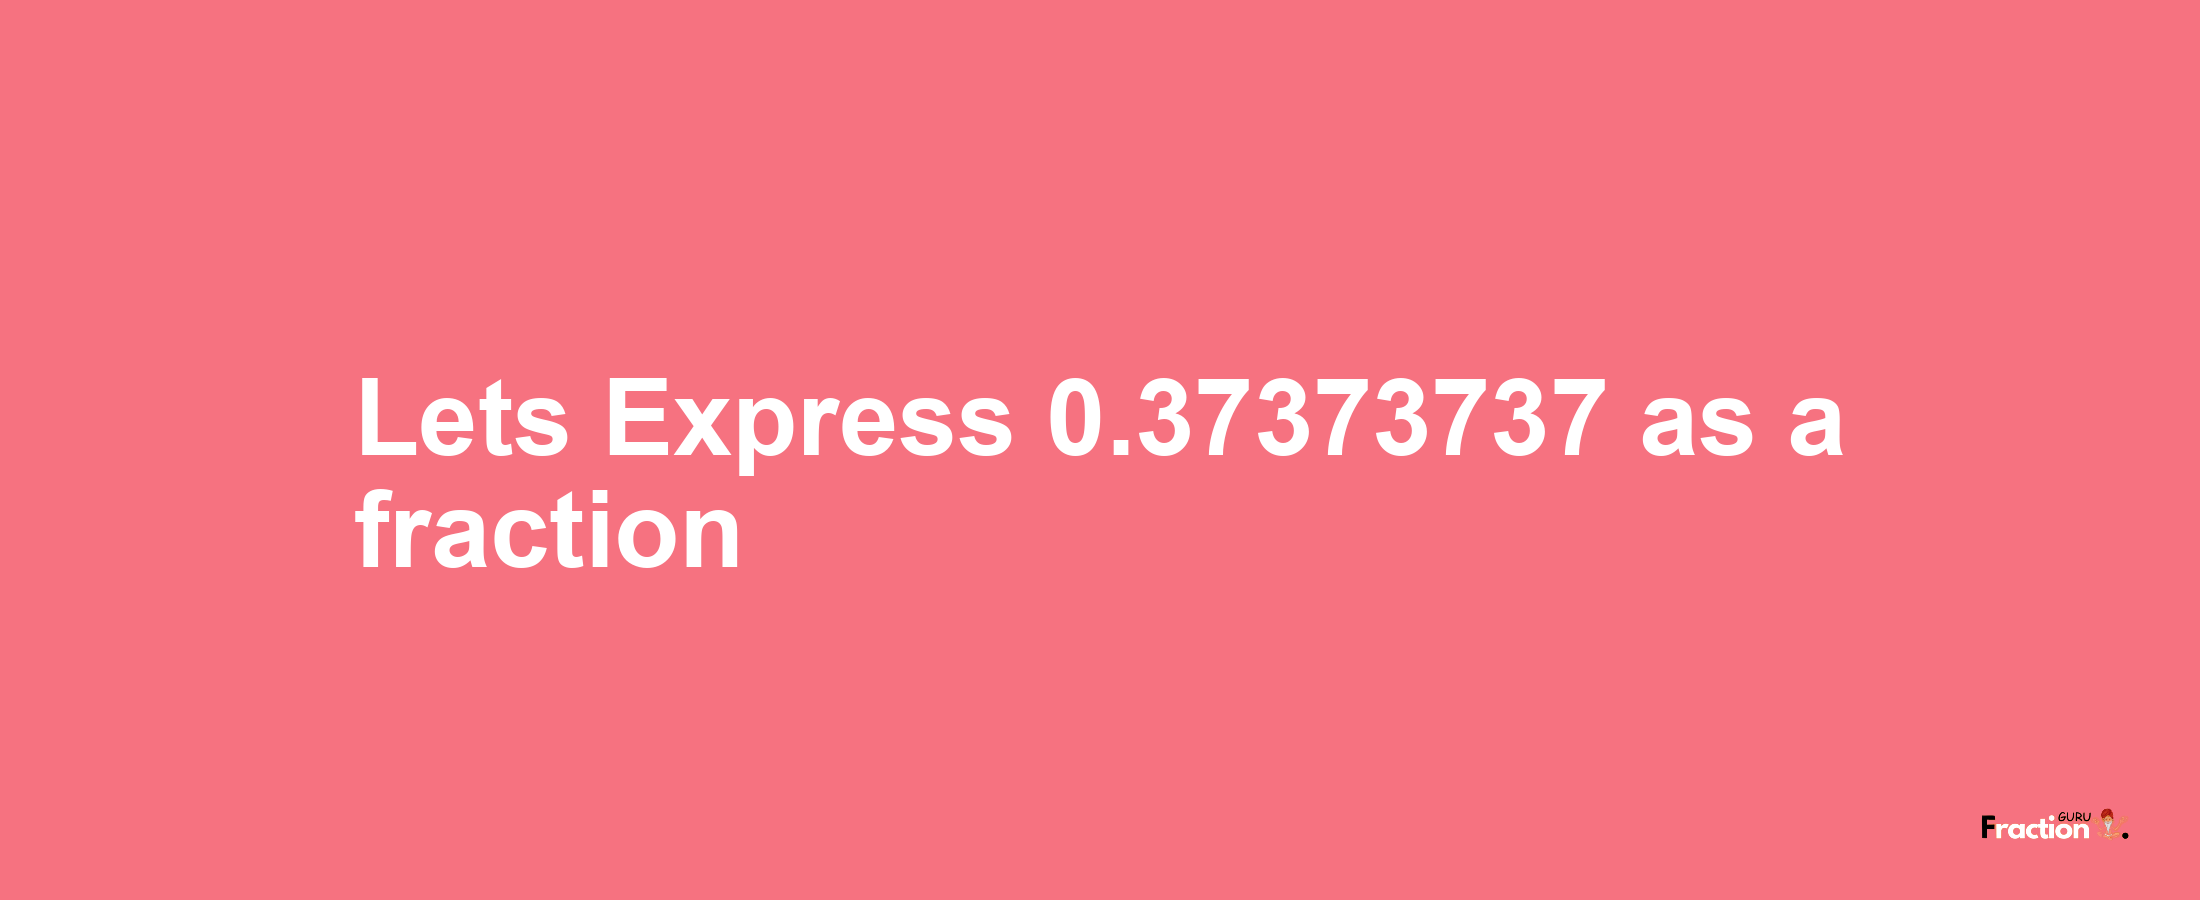 Lets Express 0.37373737 as afraction